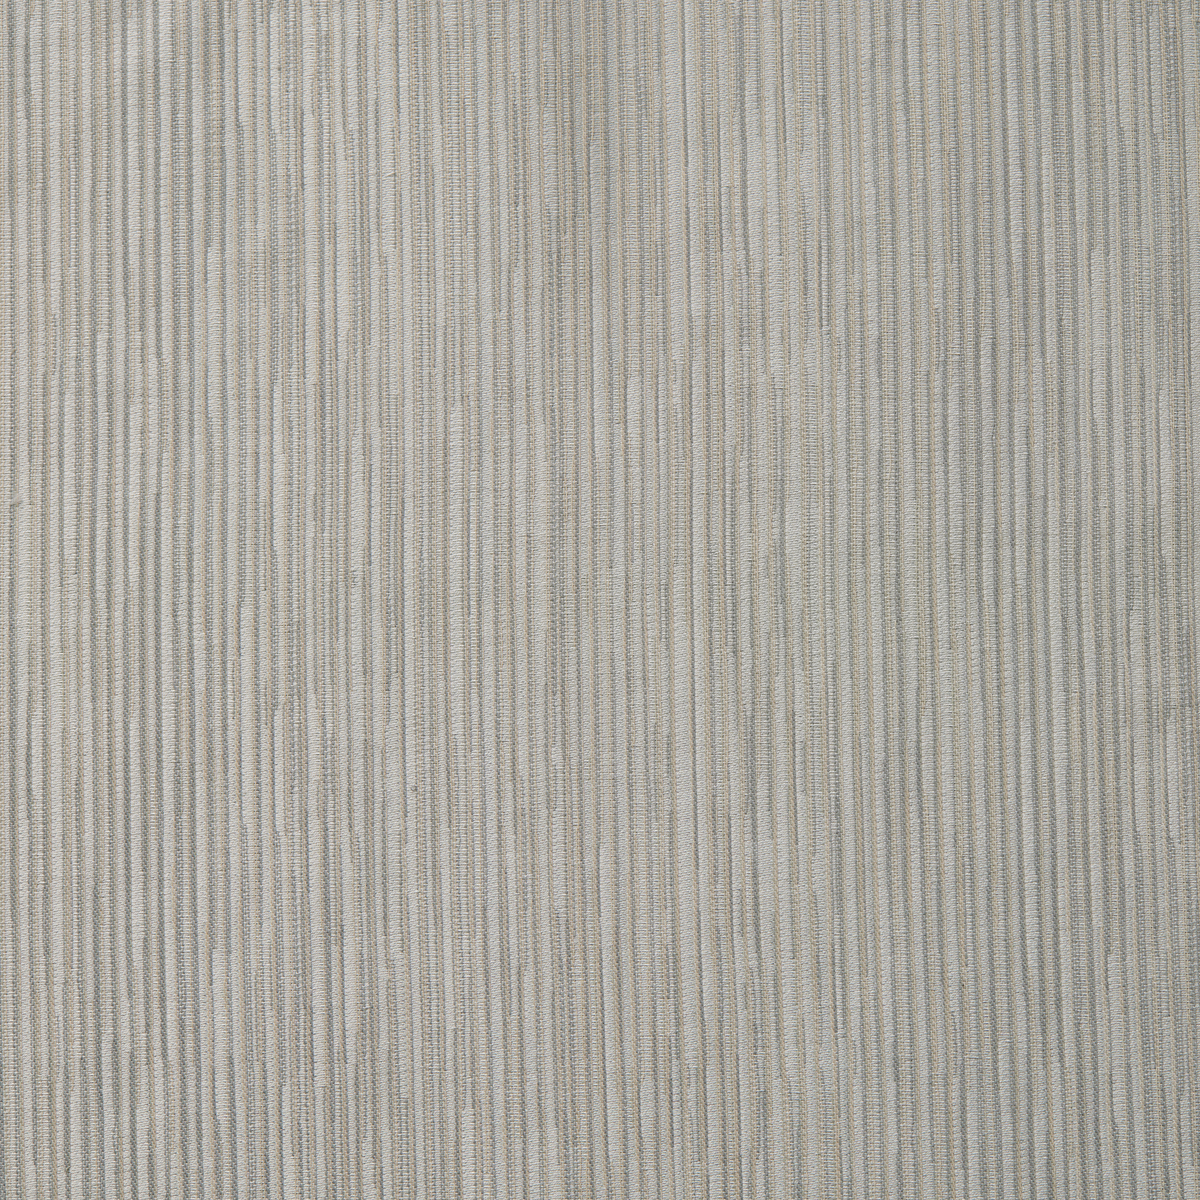 Reverse Side of Swatch Sample of Sferra Cloister Bedding in Fog Color